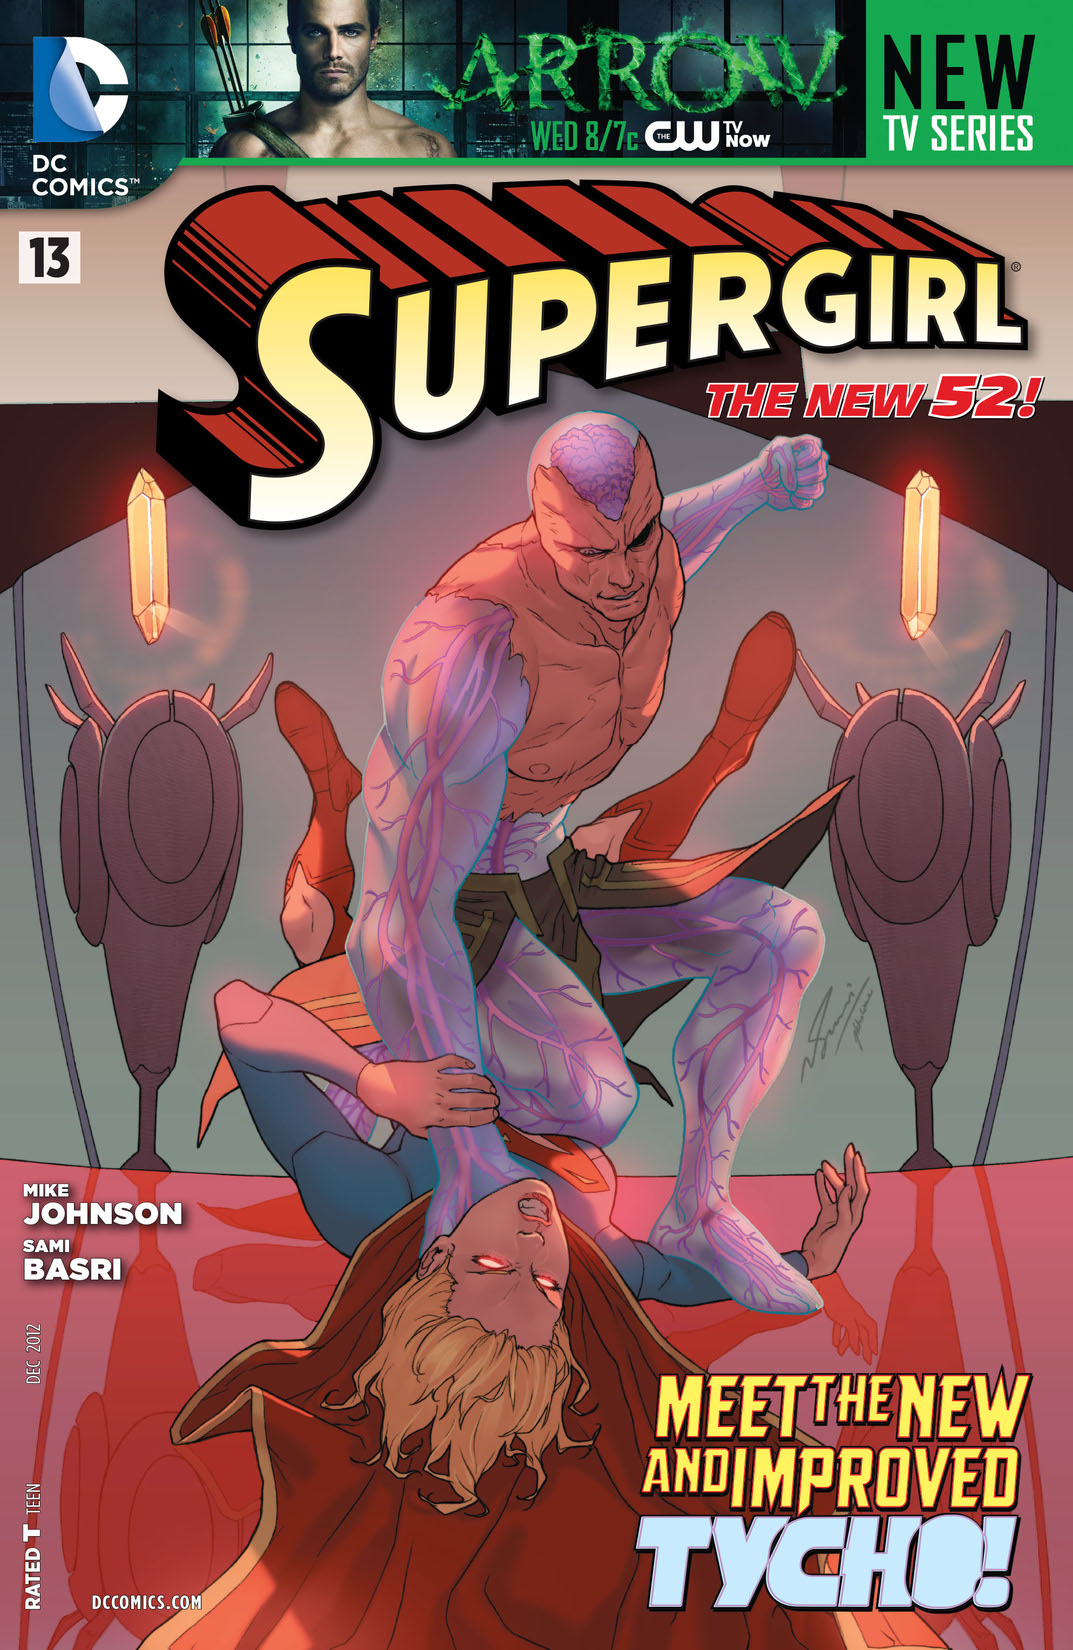 Supergirl (2011-) #13 preview images